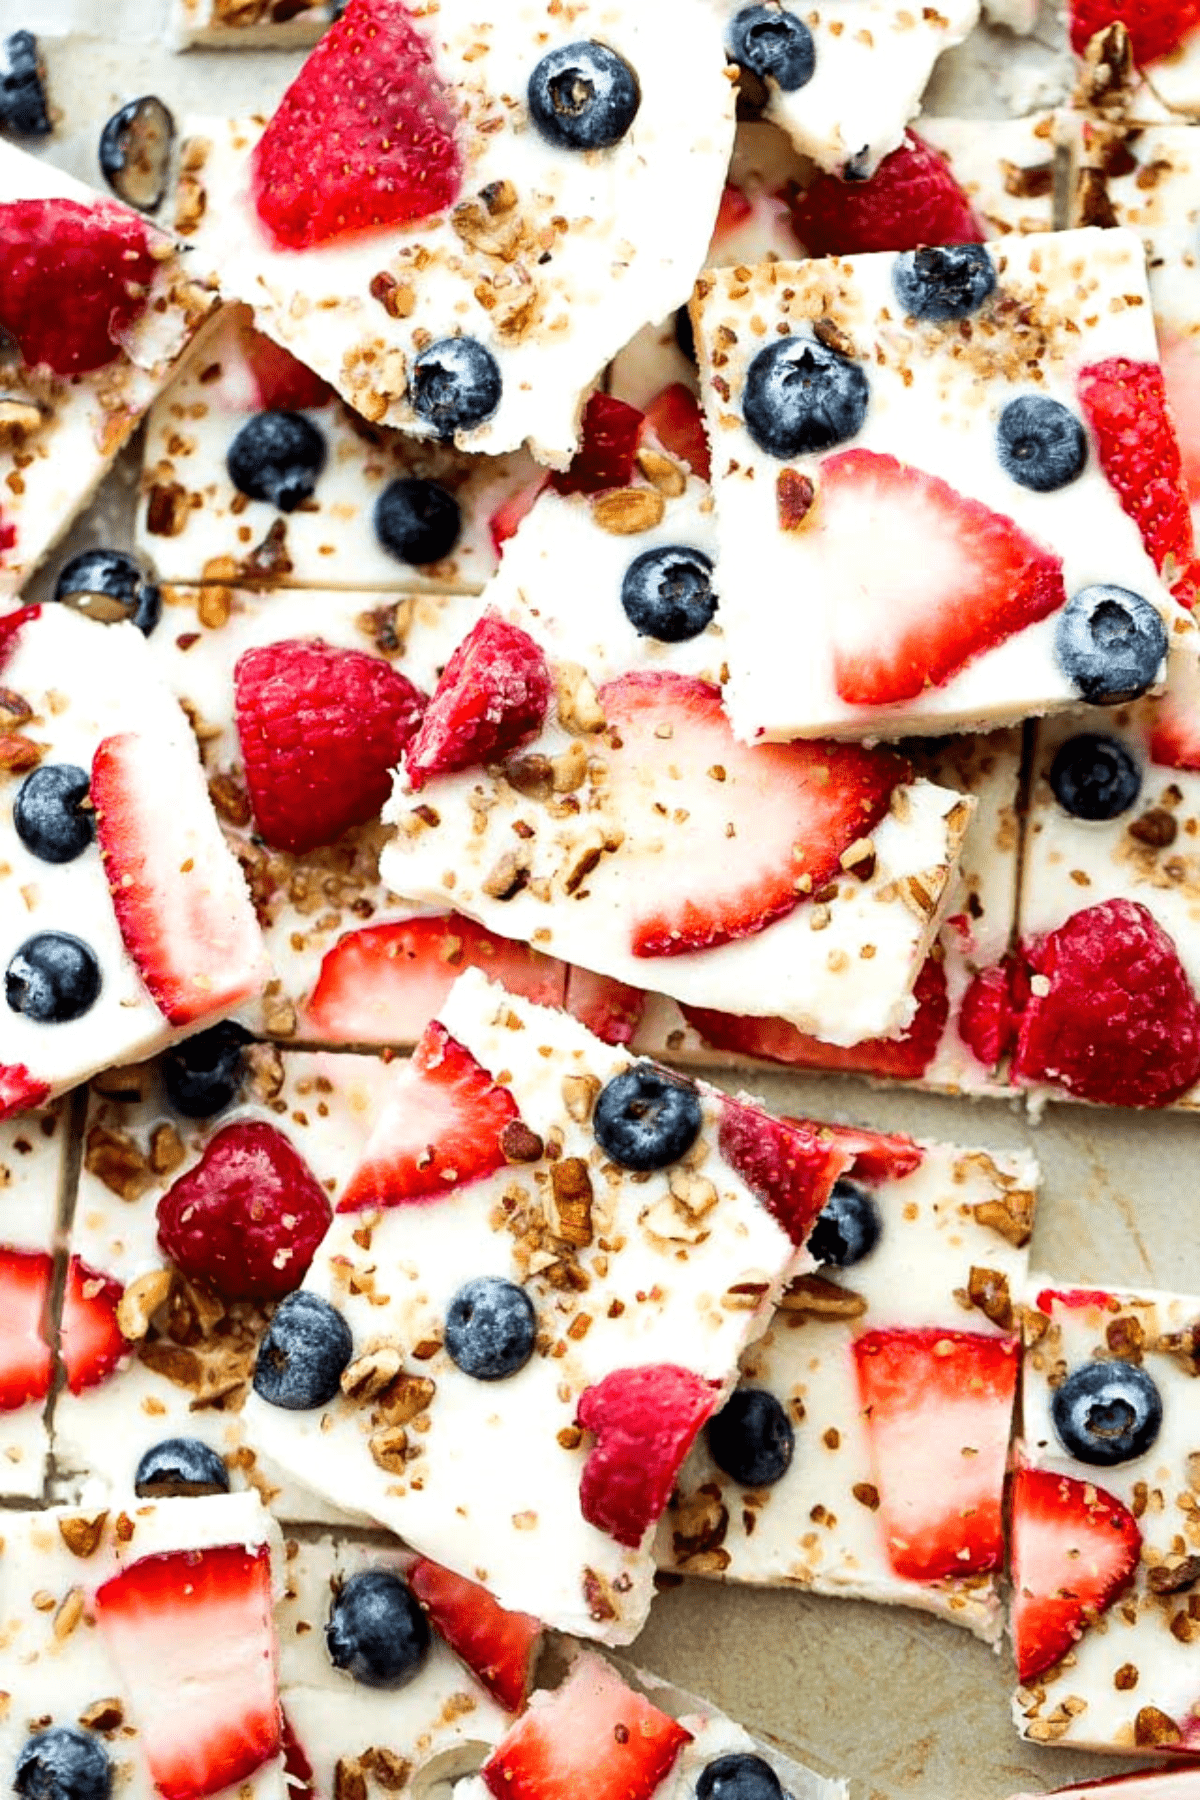 Yogurt bark topped with berries and broken into pieces.